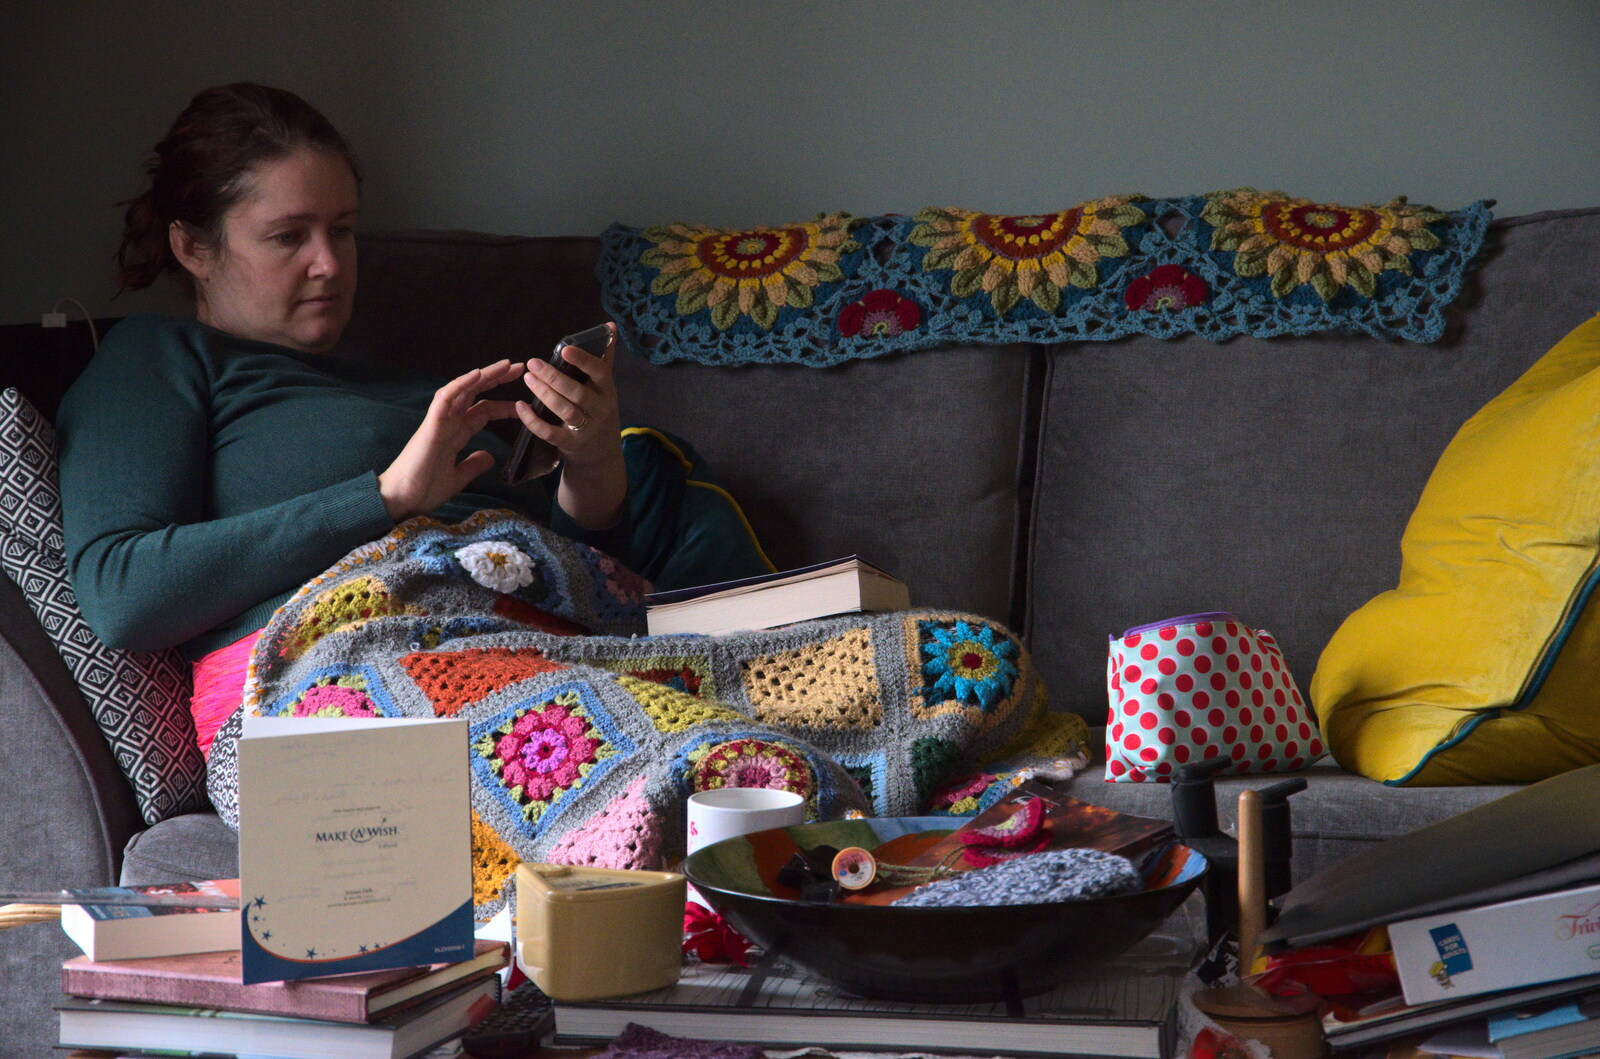 Isobel's surrounded by crochet from A Virtual New Year's Eve, Brome, Suffolk - 31st December 2020